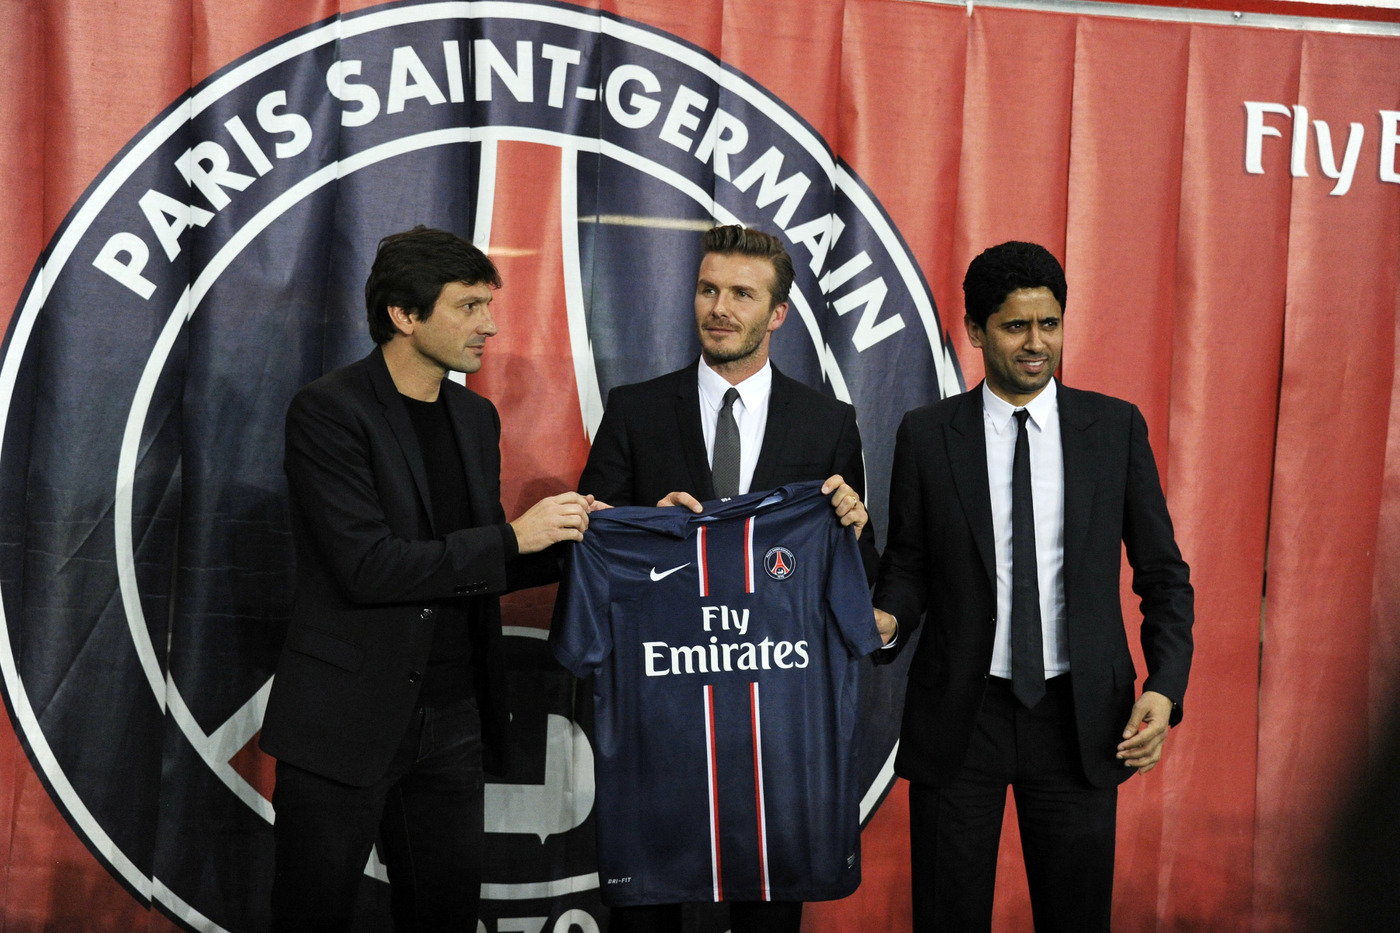 David Beckham holds a press conference to announce he has signed a five month deal to join Paris Saint-Germain